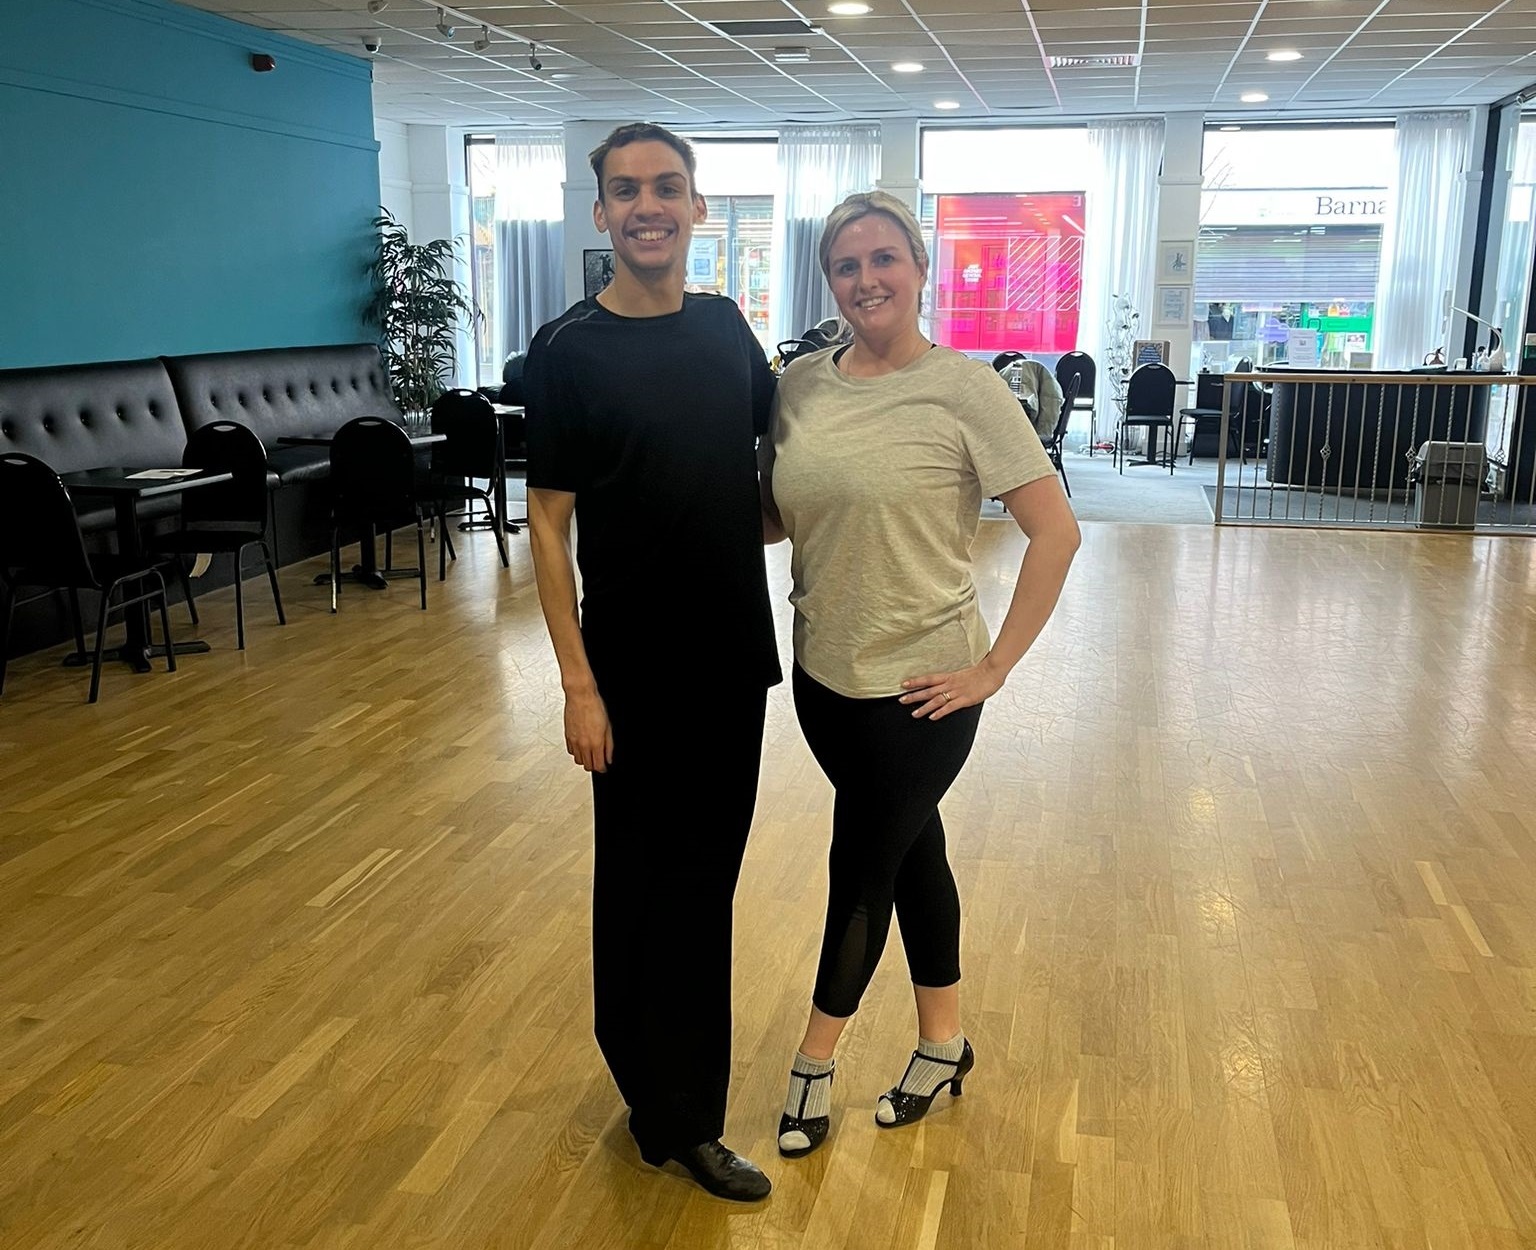 Two people stood in a dance studio